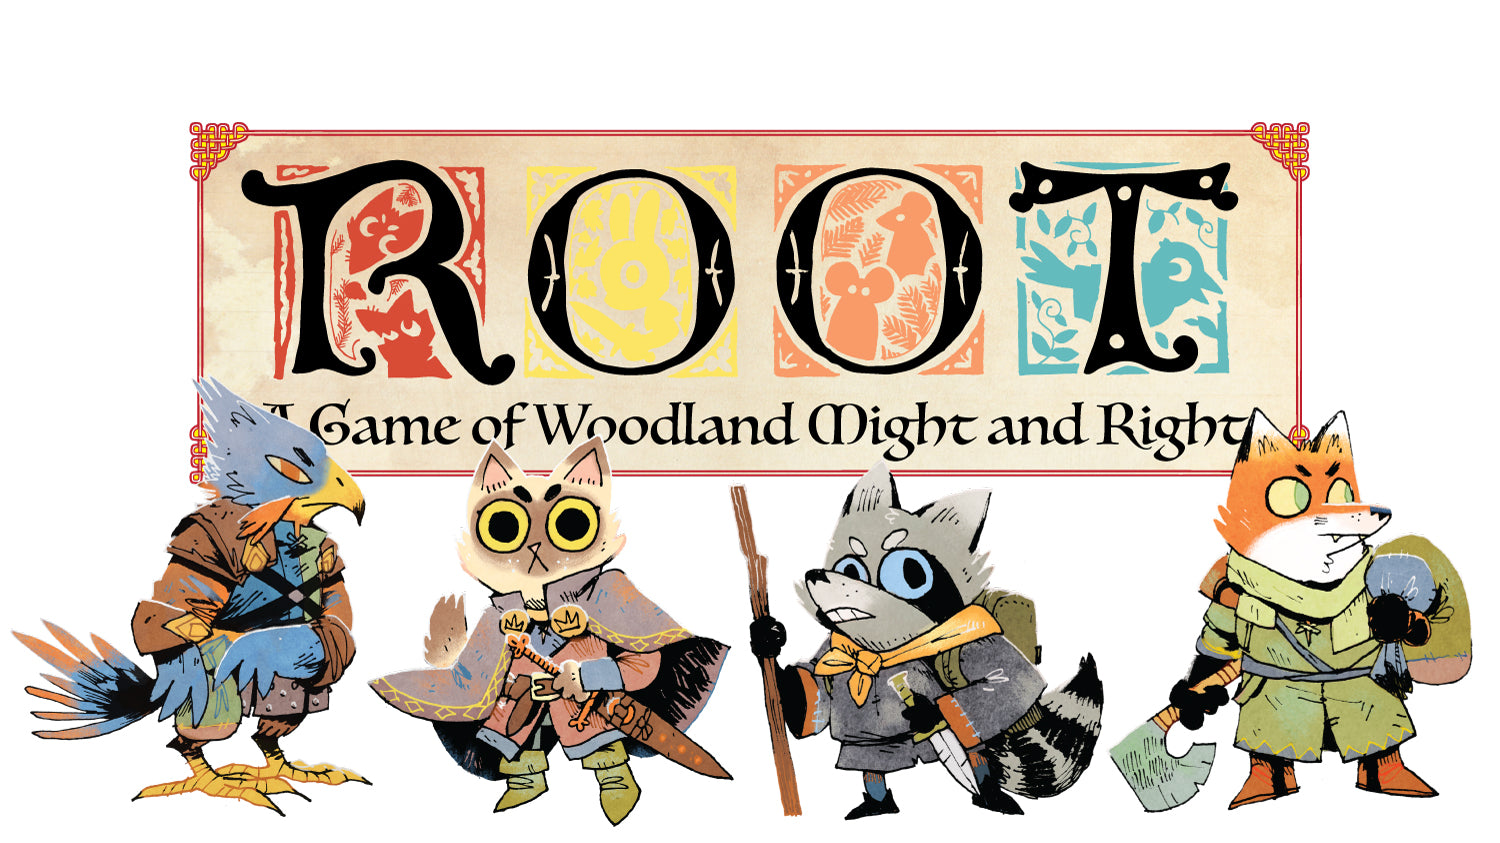 Introducing Root: A Game of Woodland Might and Right